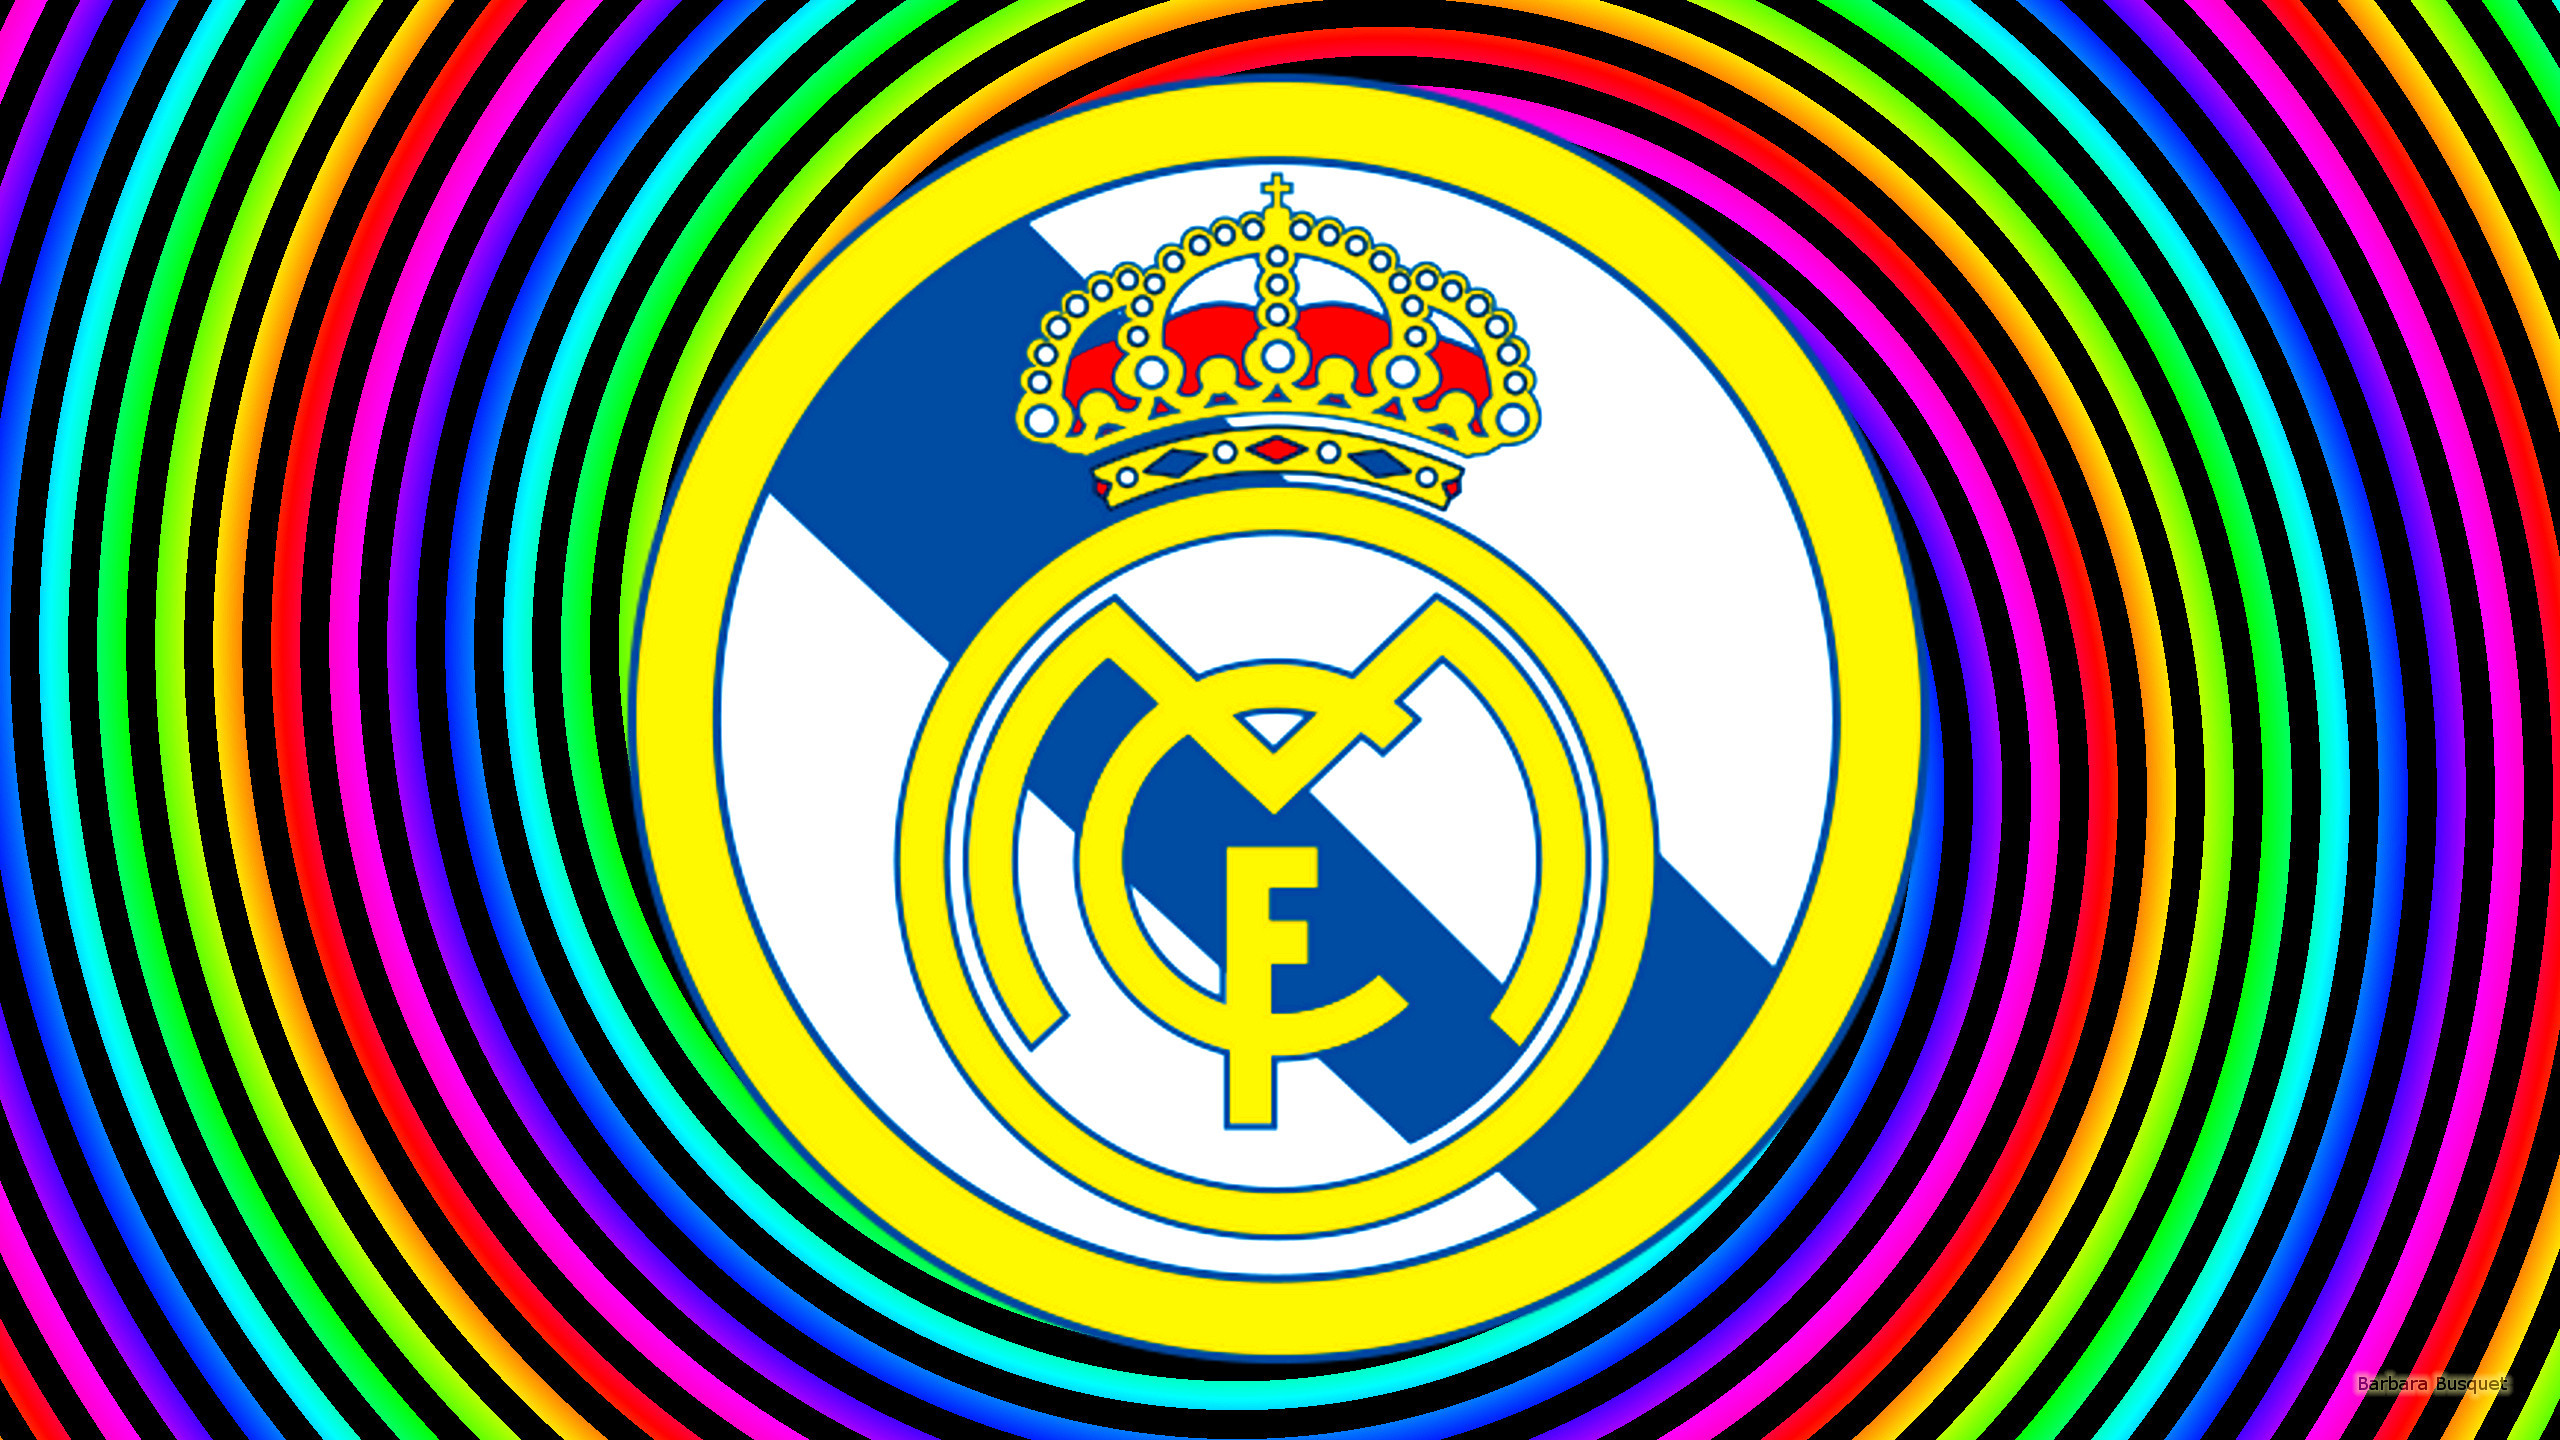 2560x1440 Real Madrid wallpaper with spirals in rainbow colors.